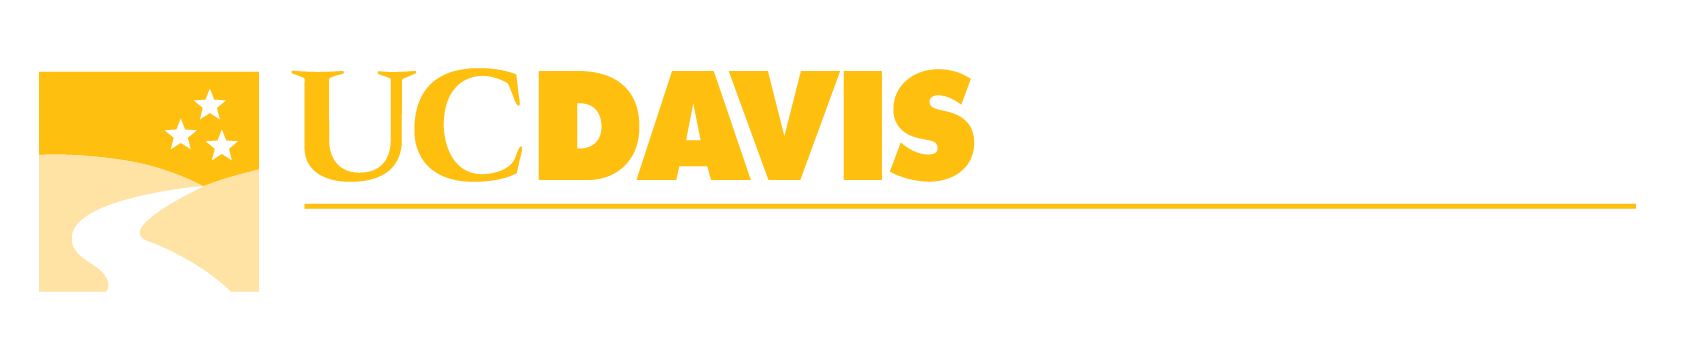 UC Davis College of Letters & Science Logo